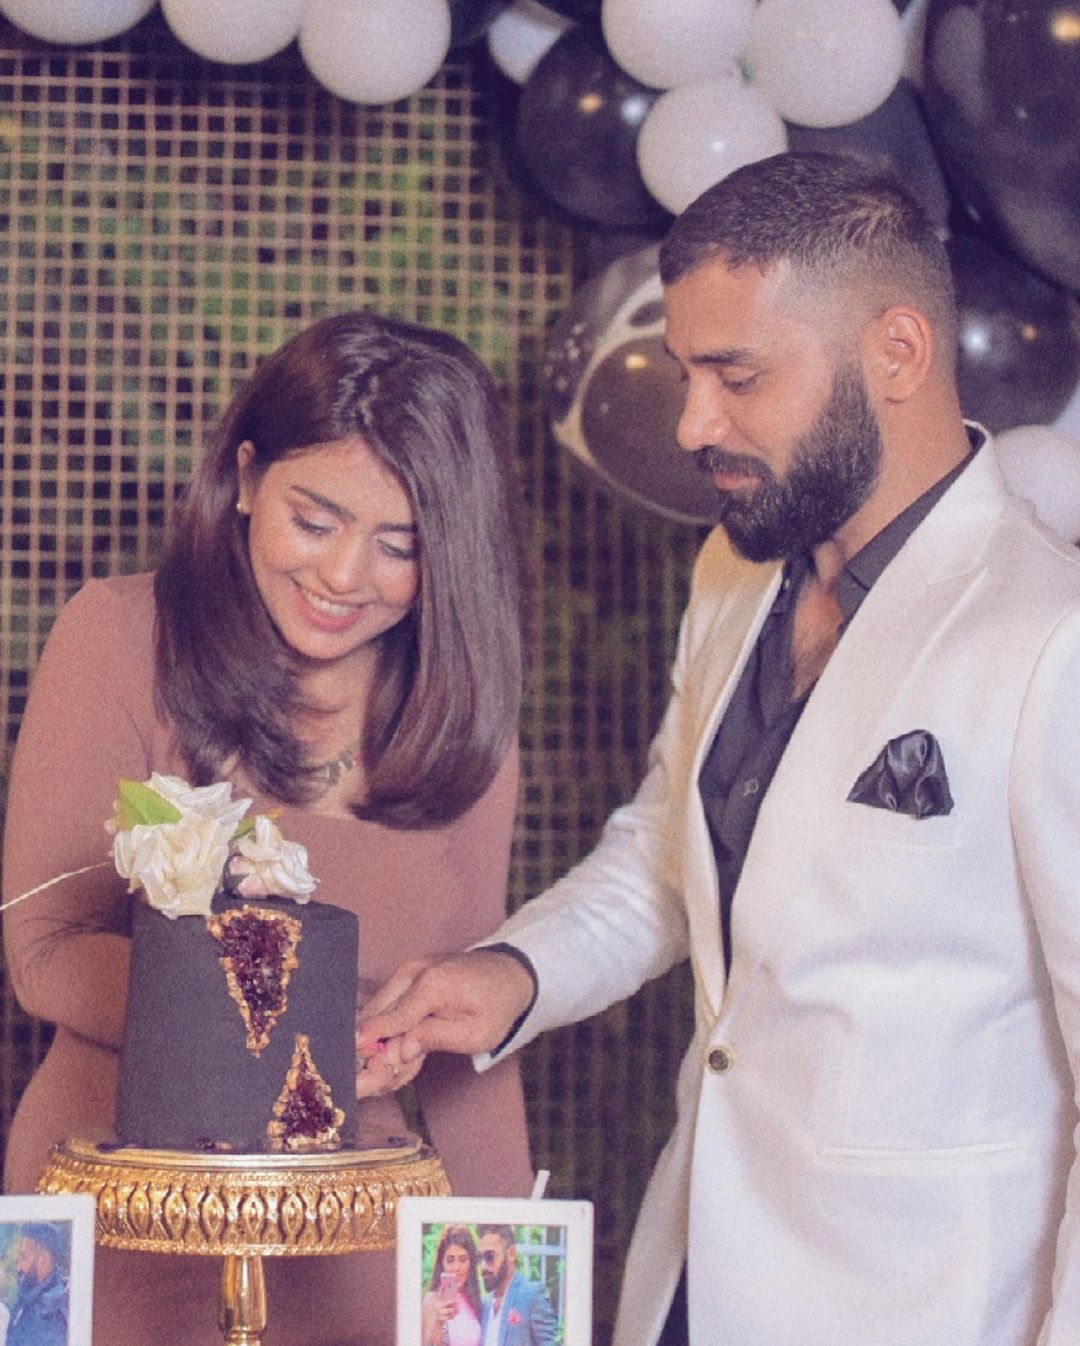 Anumta Qureshi with her Husband on Their Birthday Party